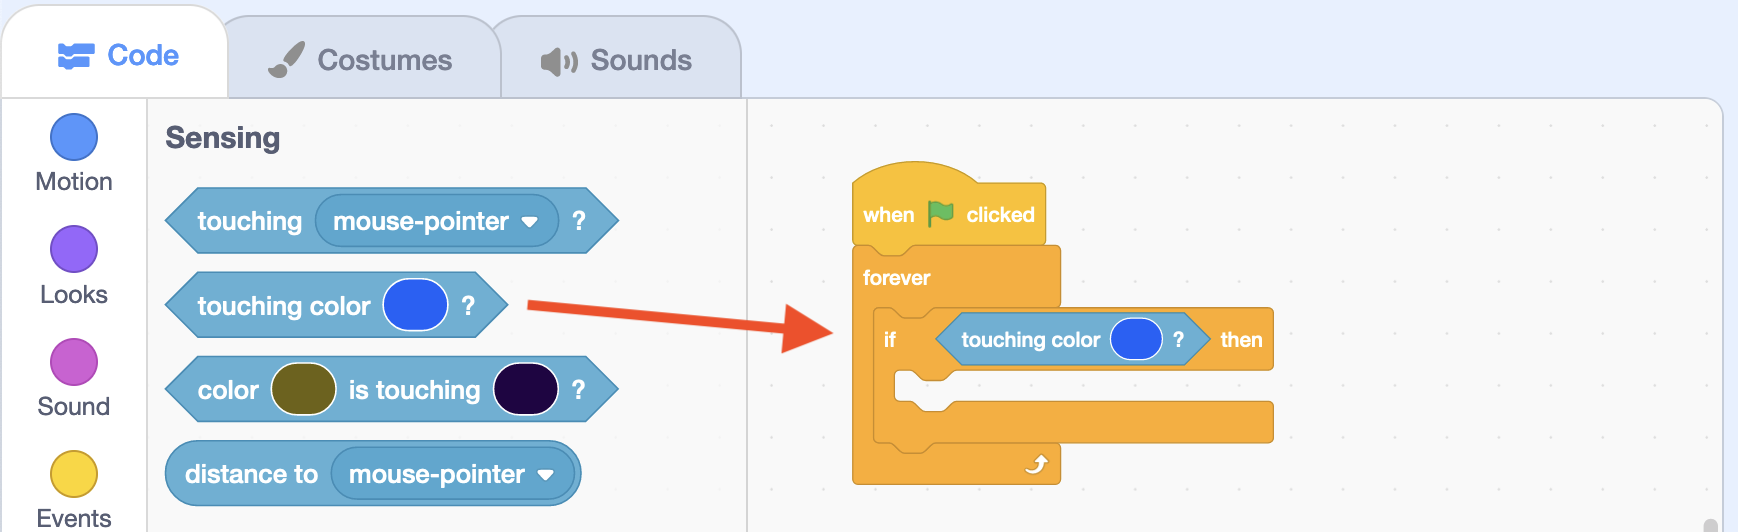 When touching color () Block